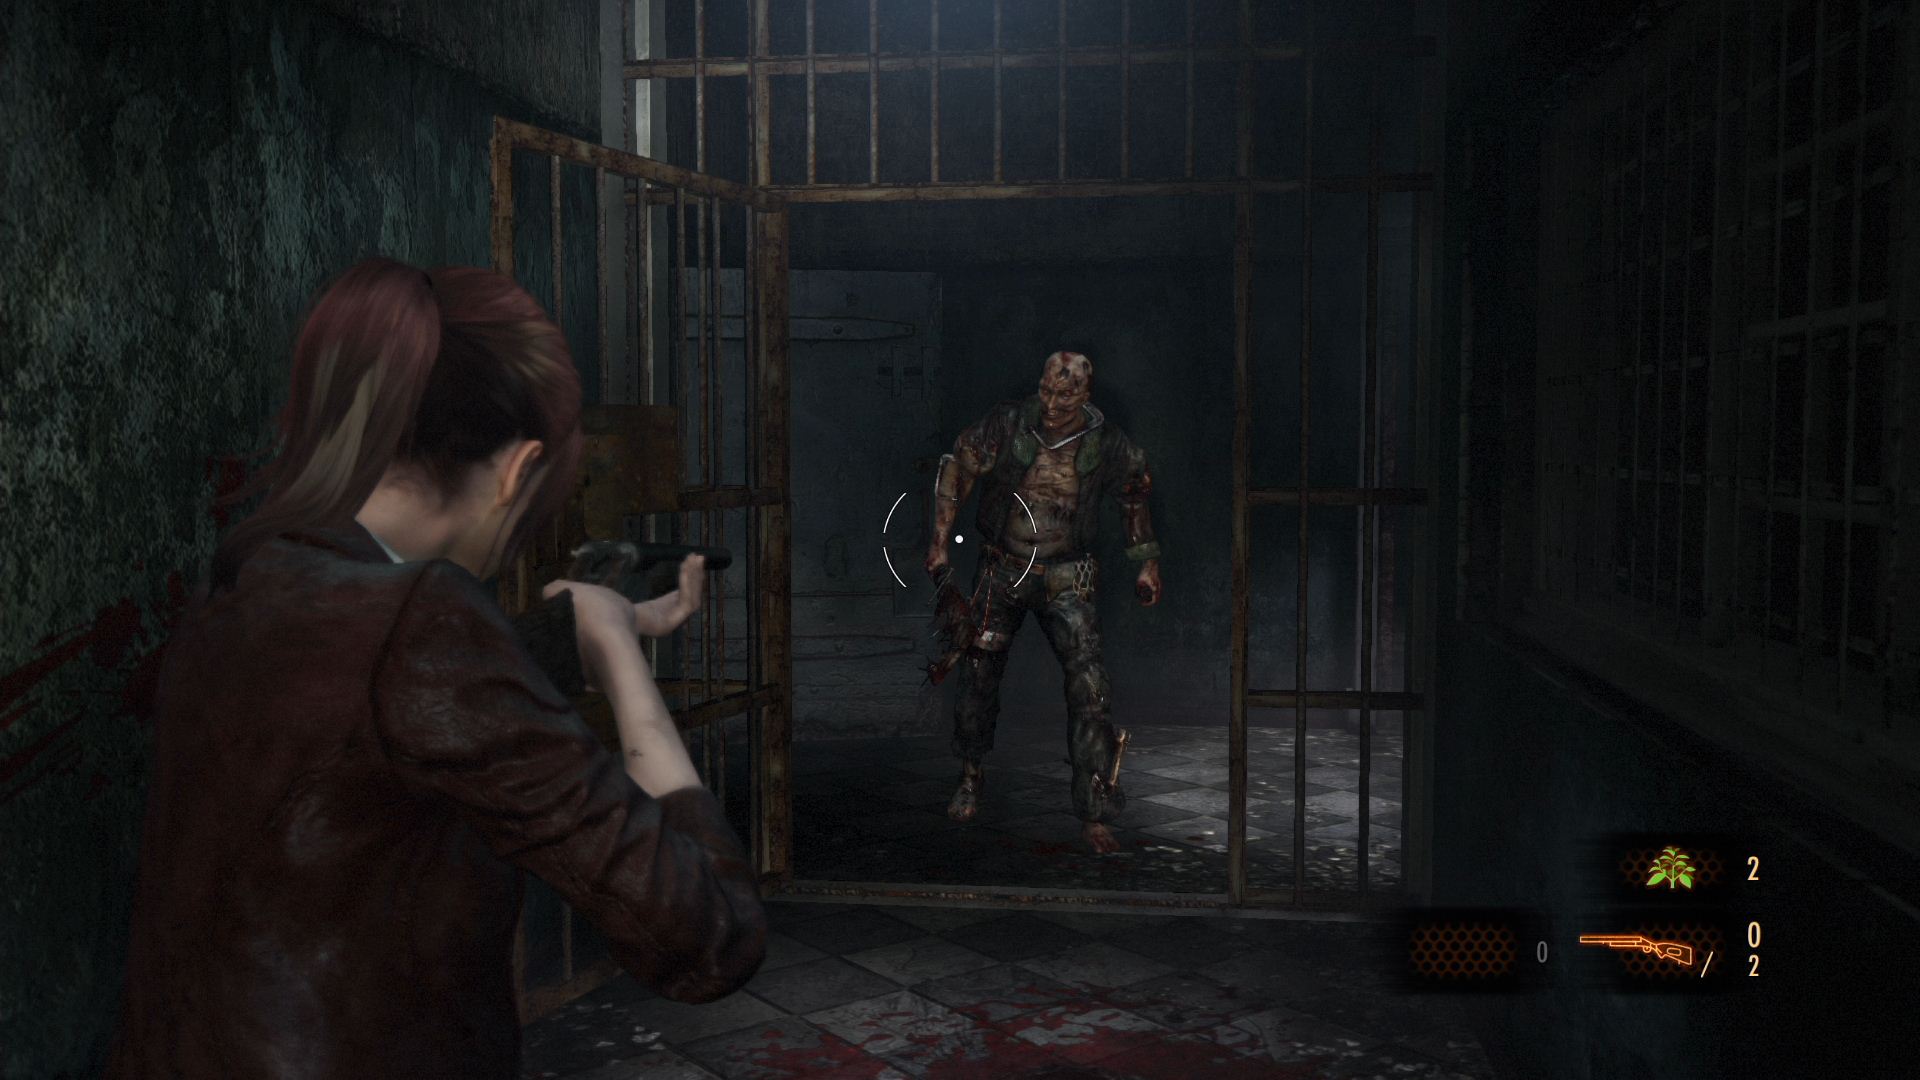 free download resident evil revelations 2 xbox one